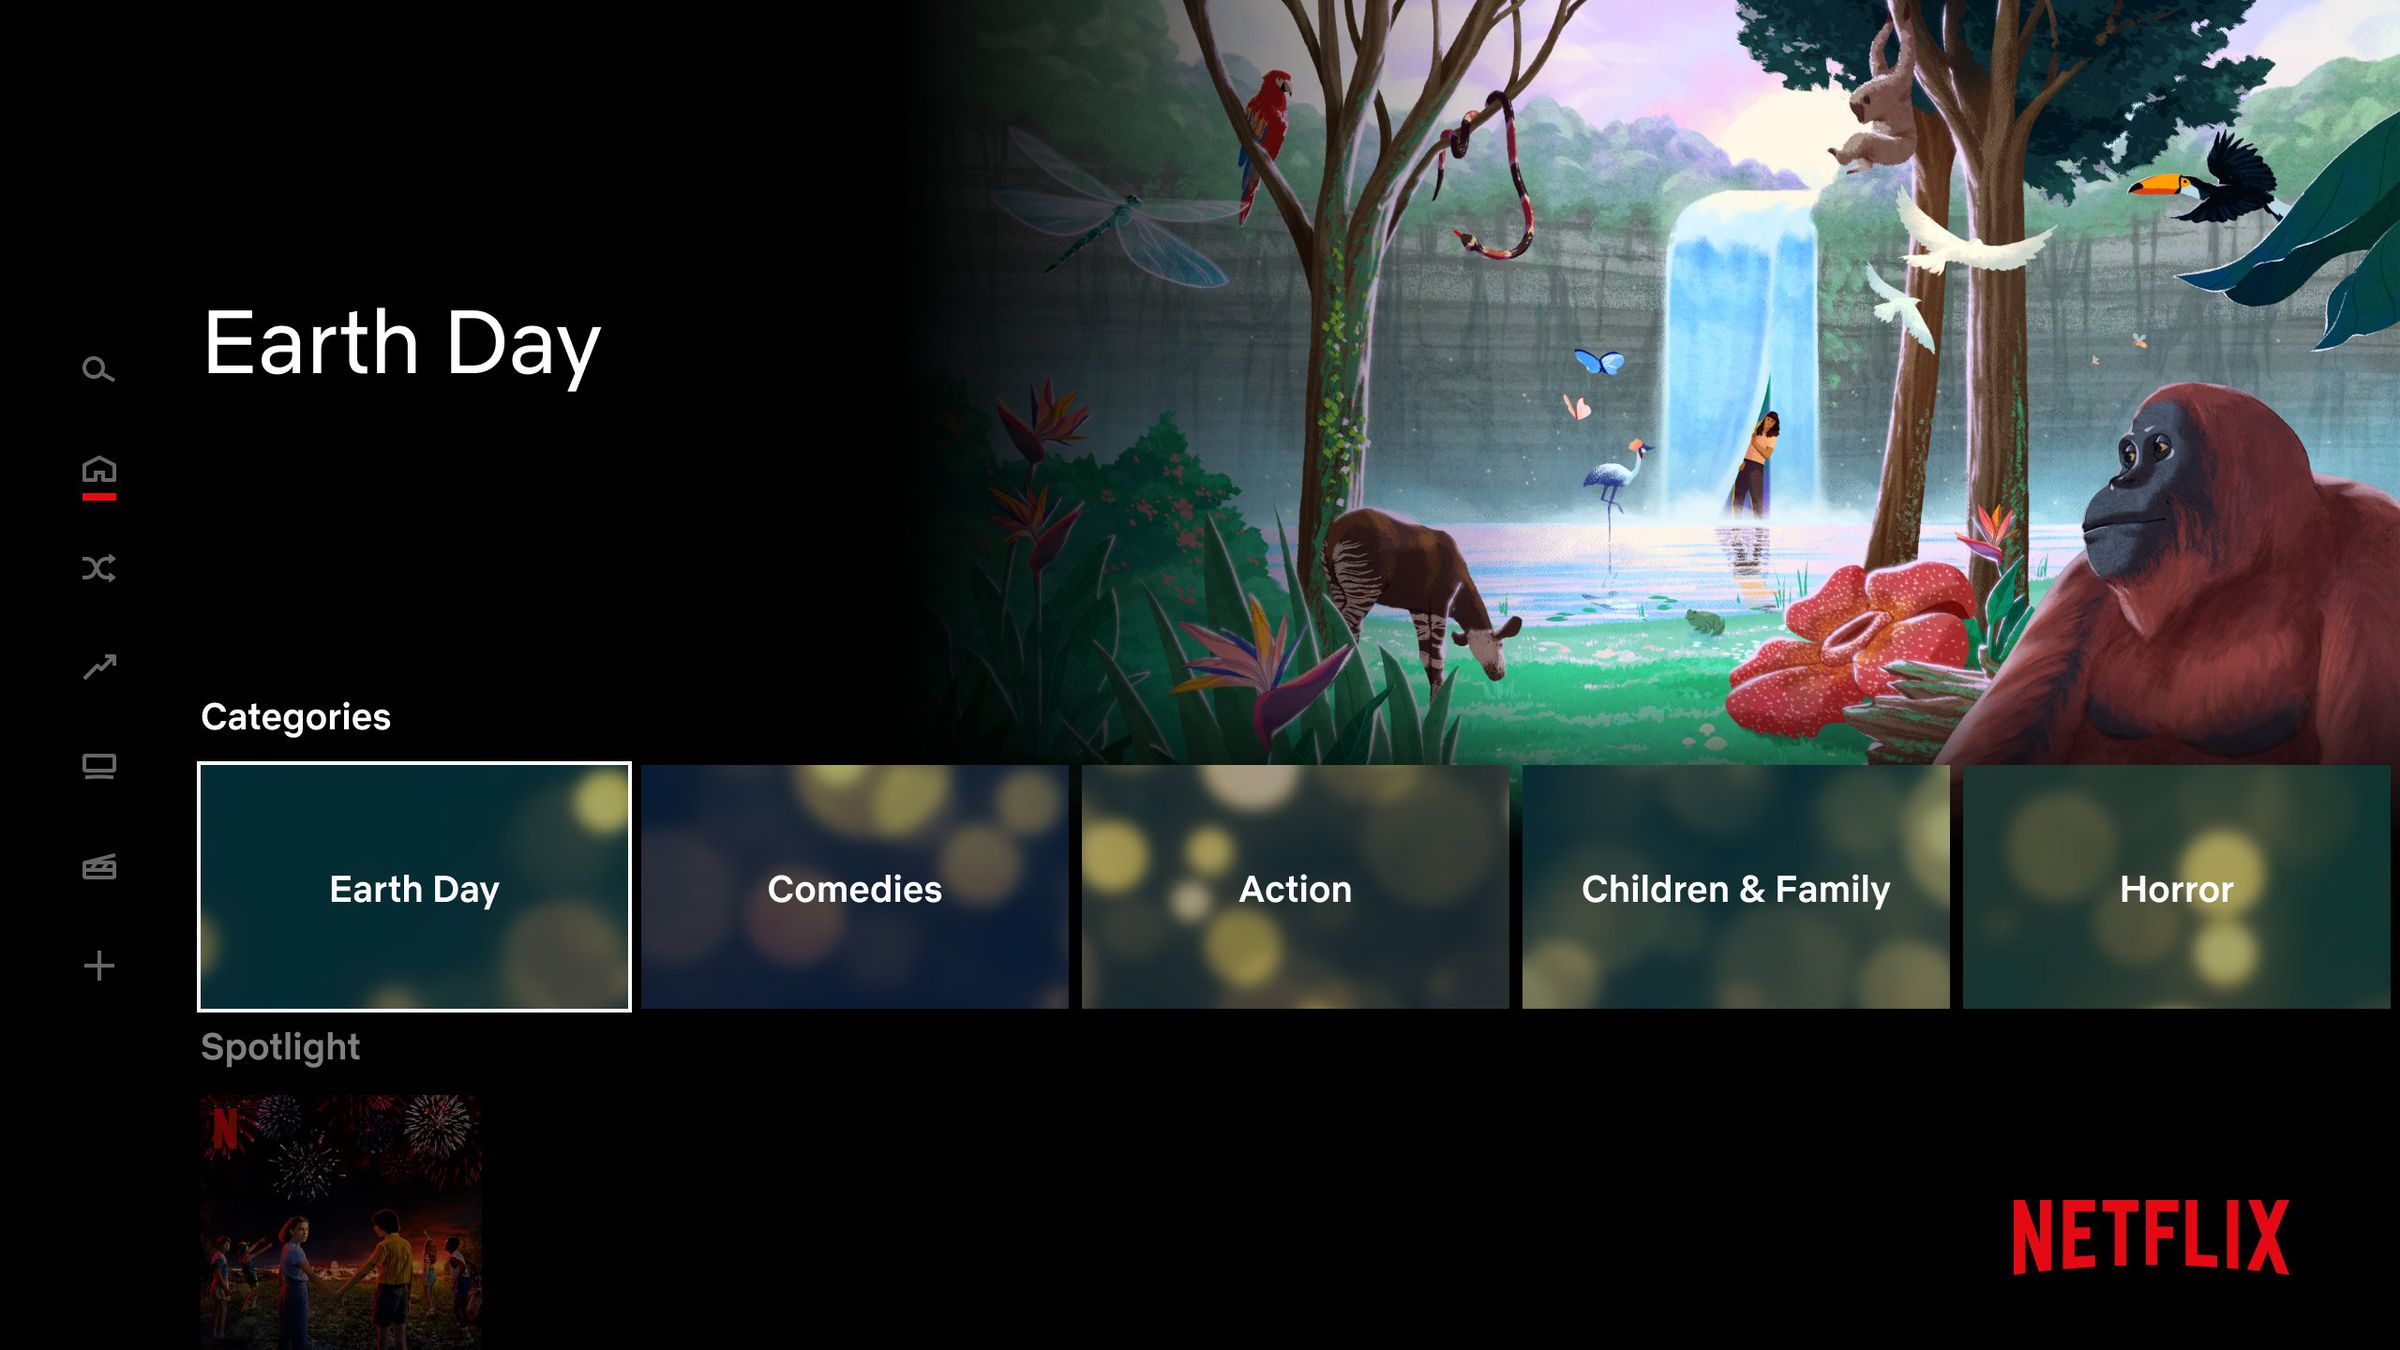 Netflix’s old Category row. Now these sections are a part of the hub menu that you can select from the left rail.